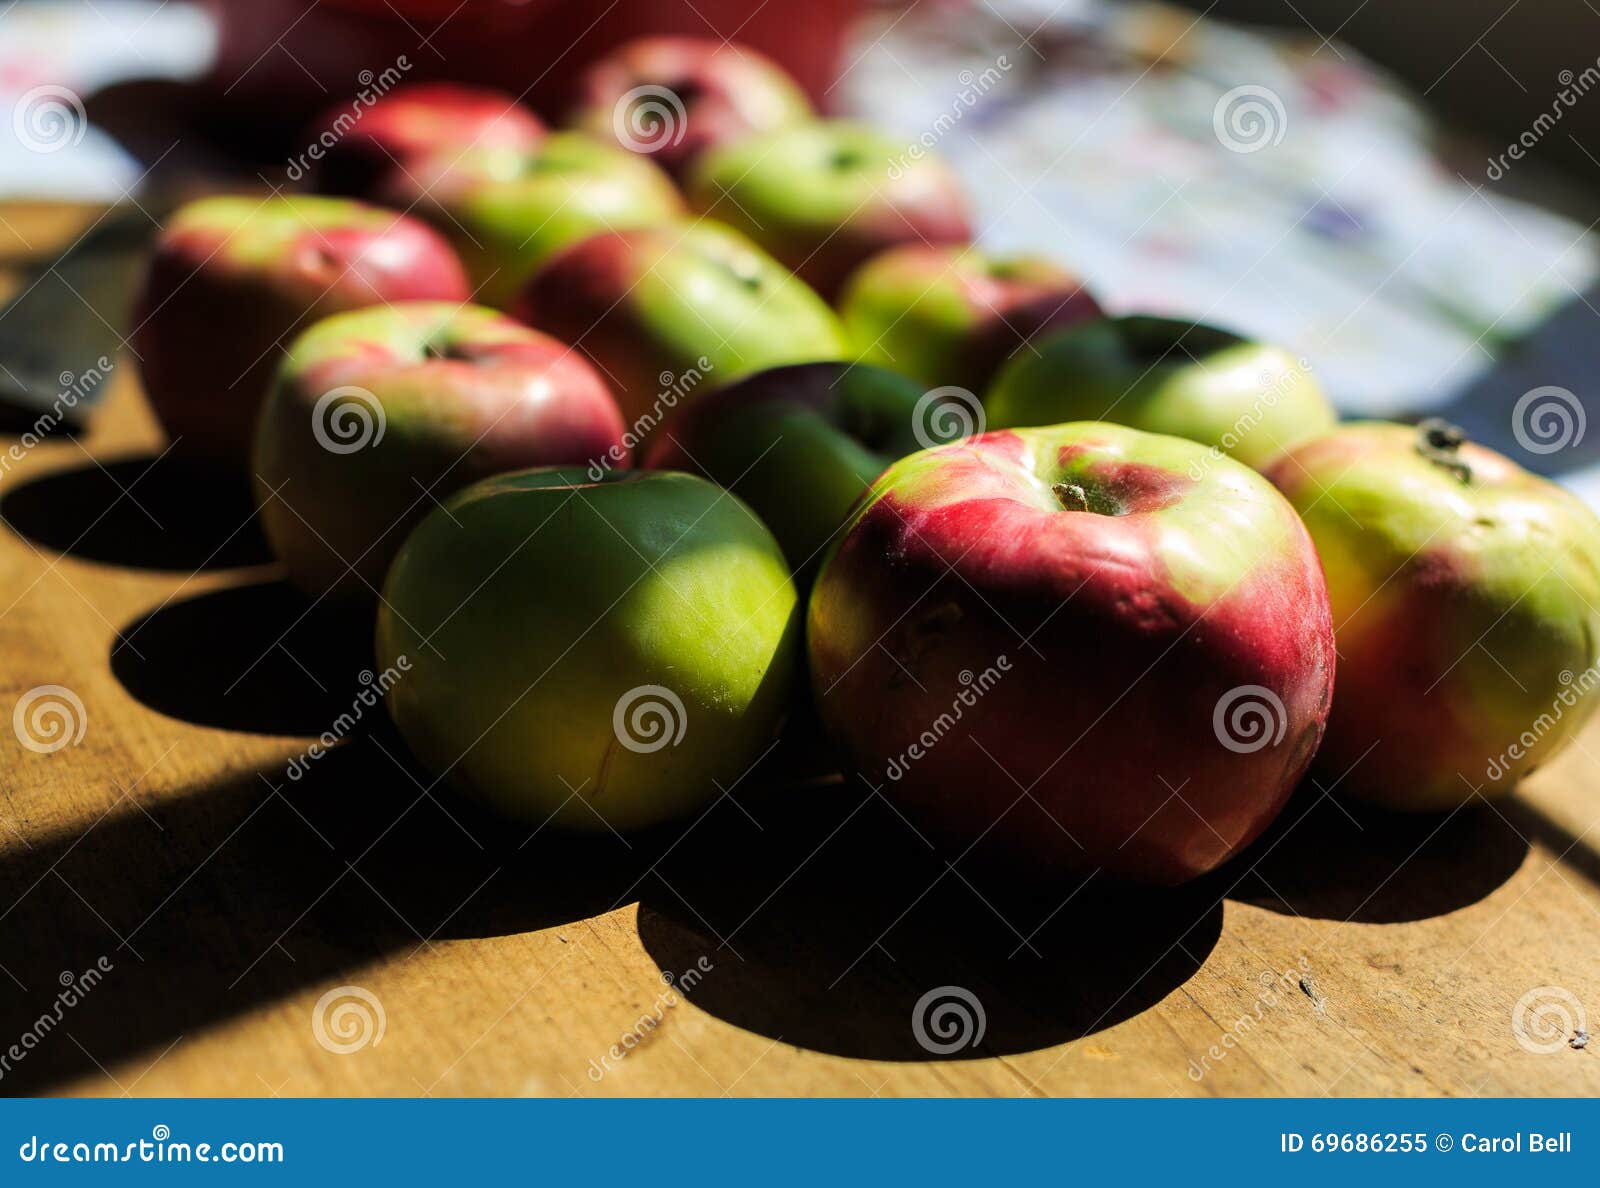 Making Applesauce From Organic Mcintosh Apples Stock Image Image Of